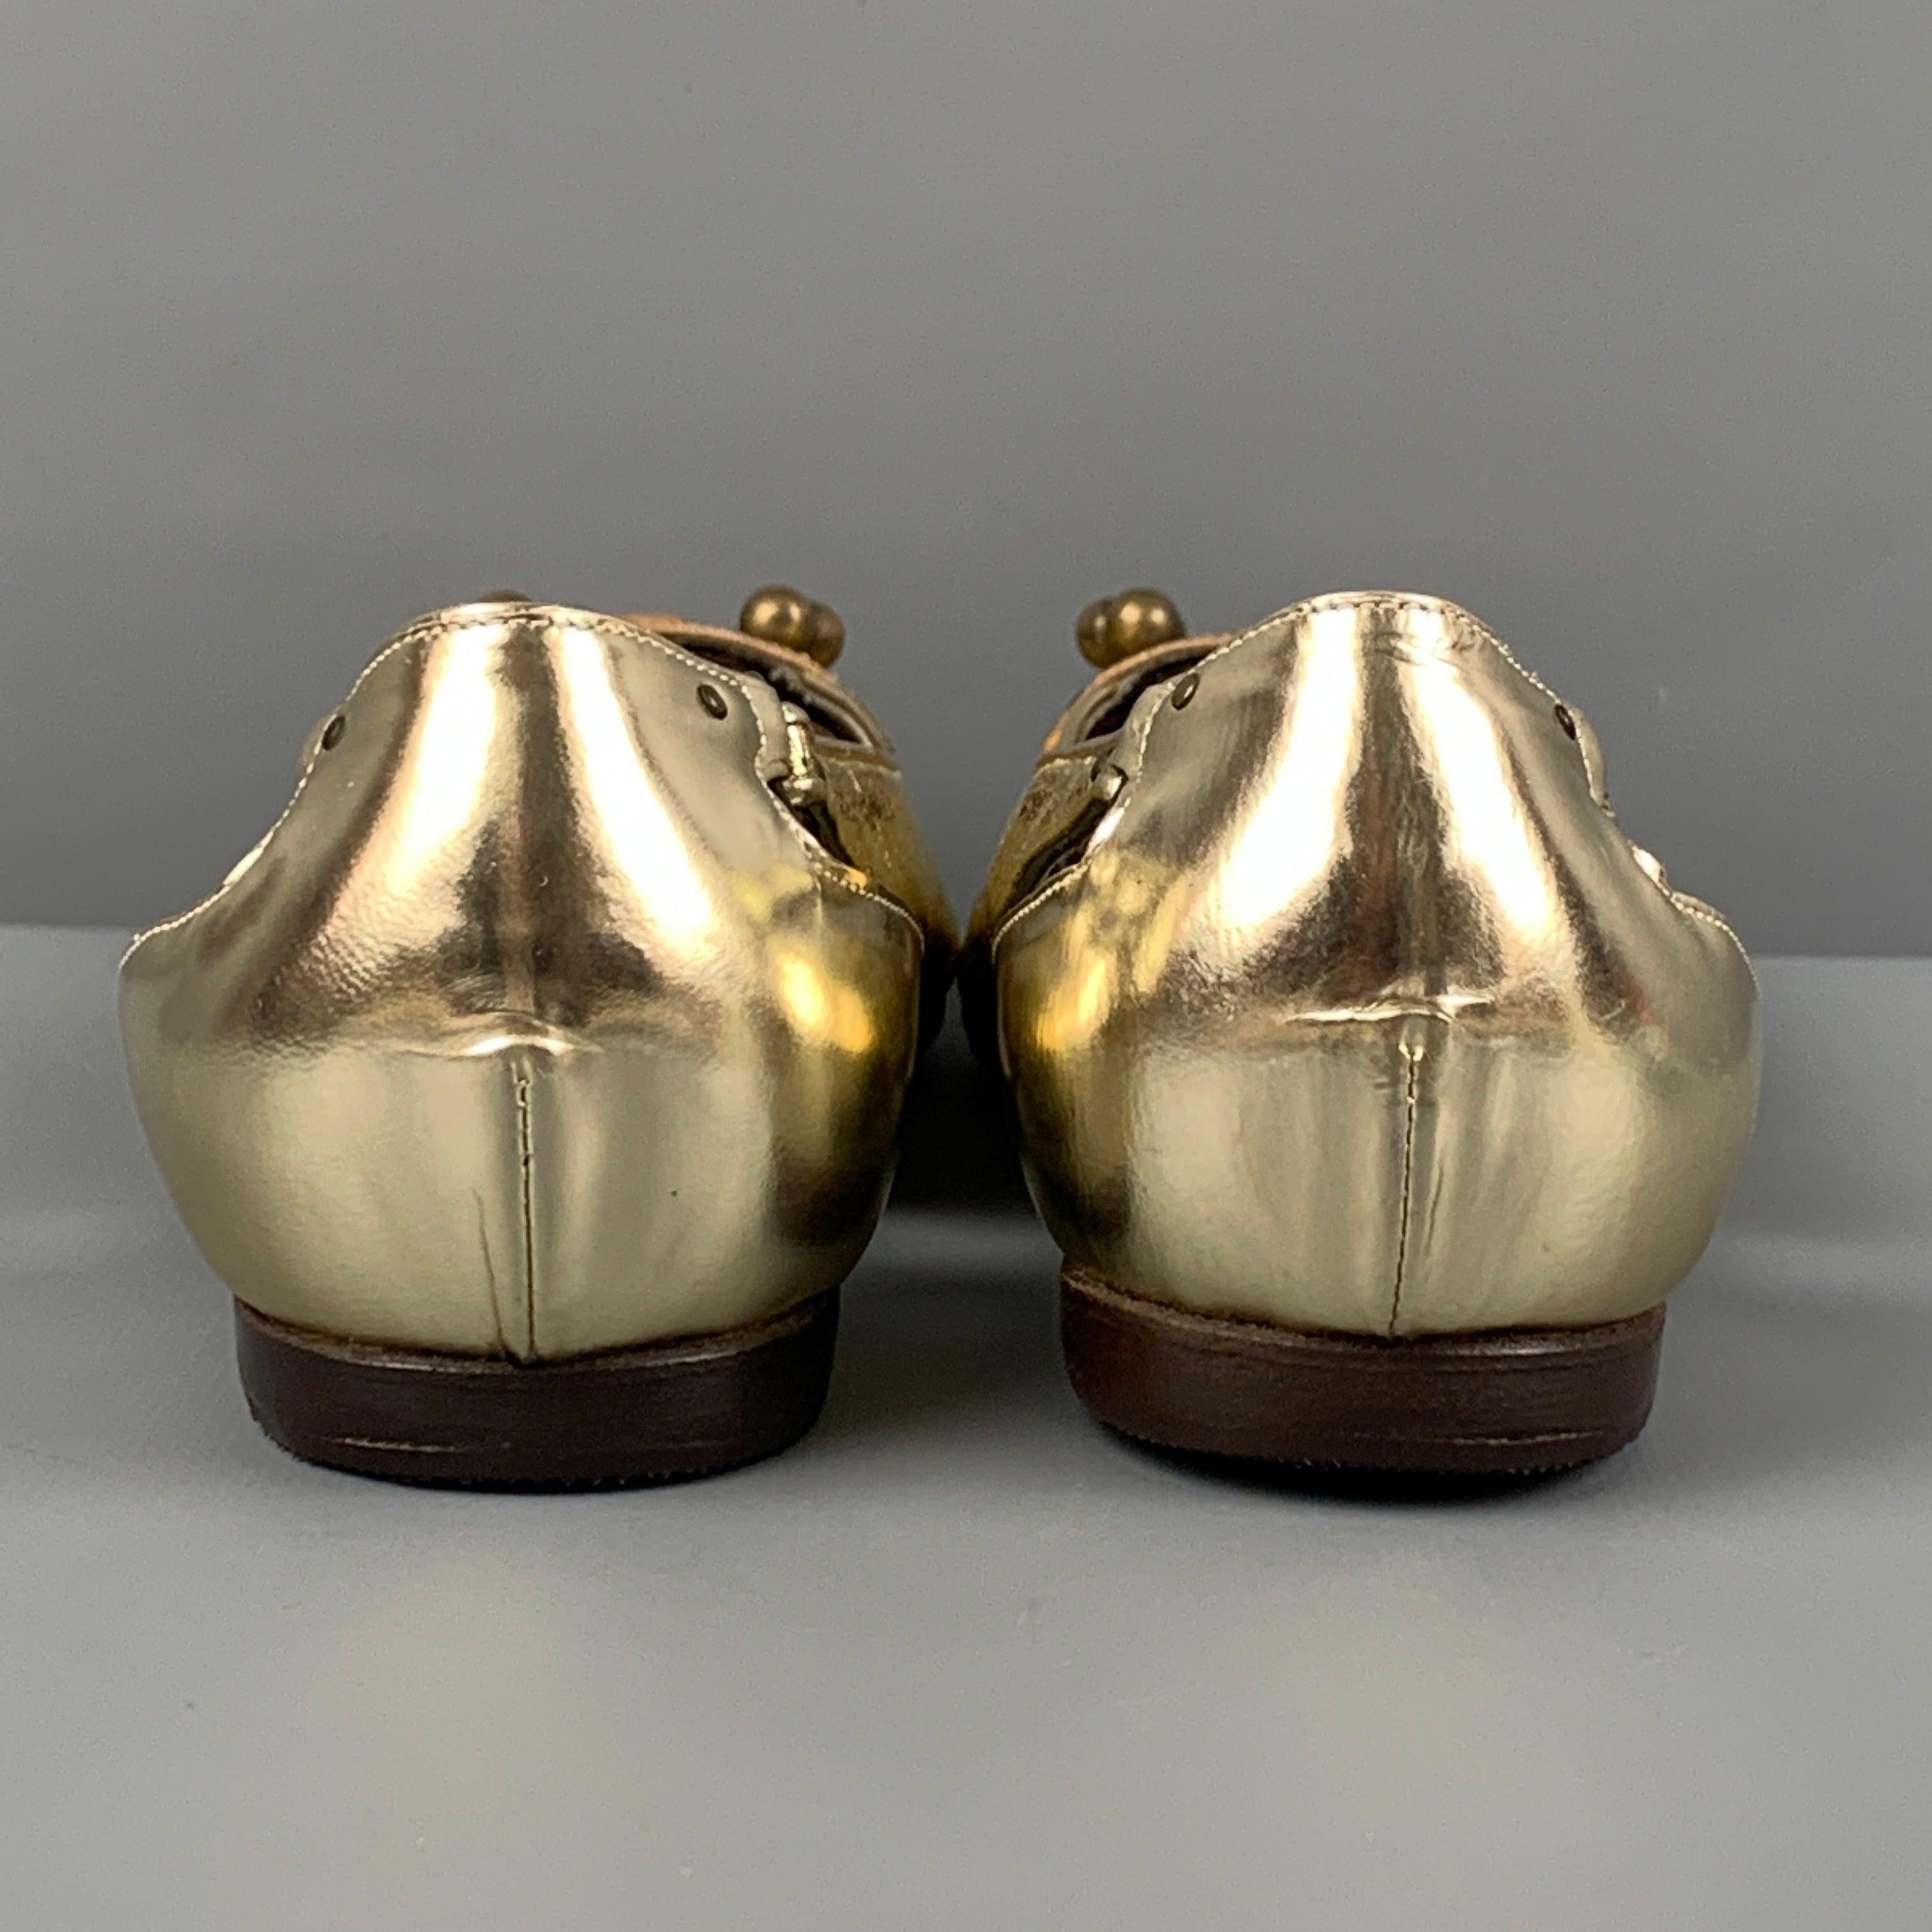 PROENZA SCHOULER Size 7 Gold Leather Metallic Flats For Sale 1